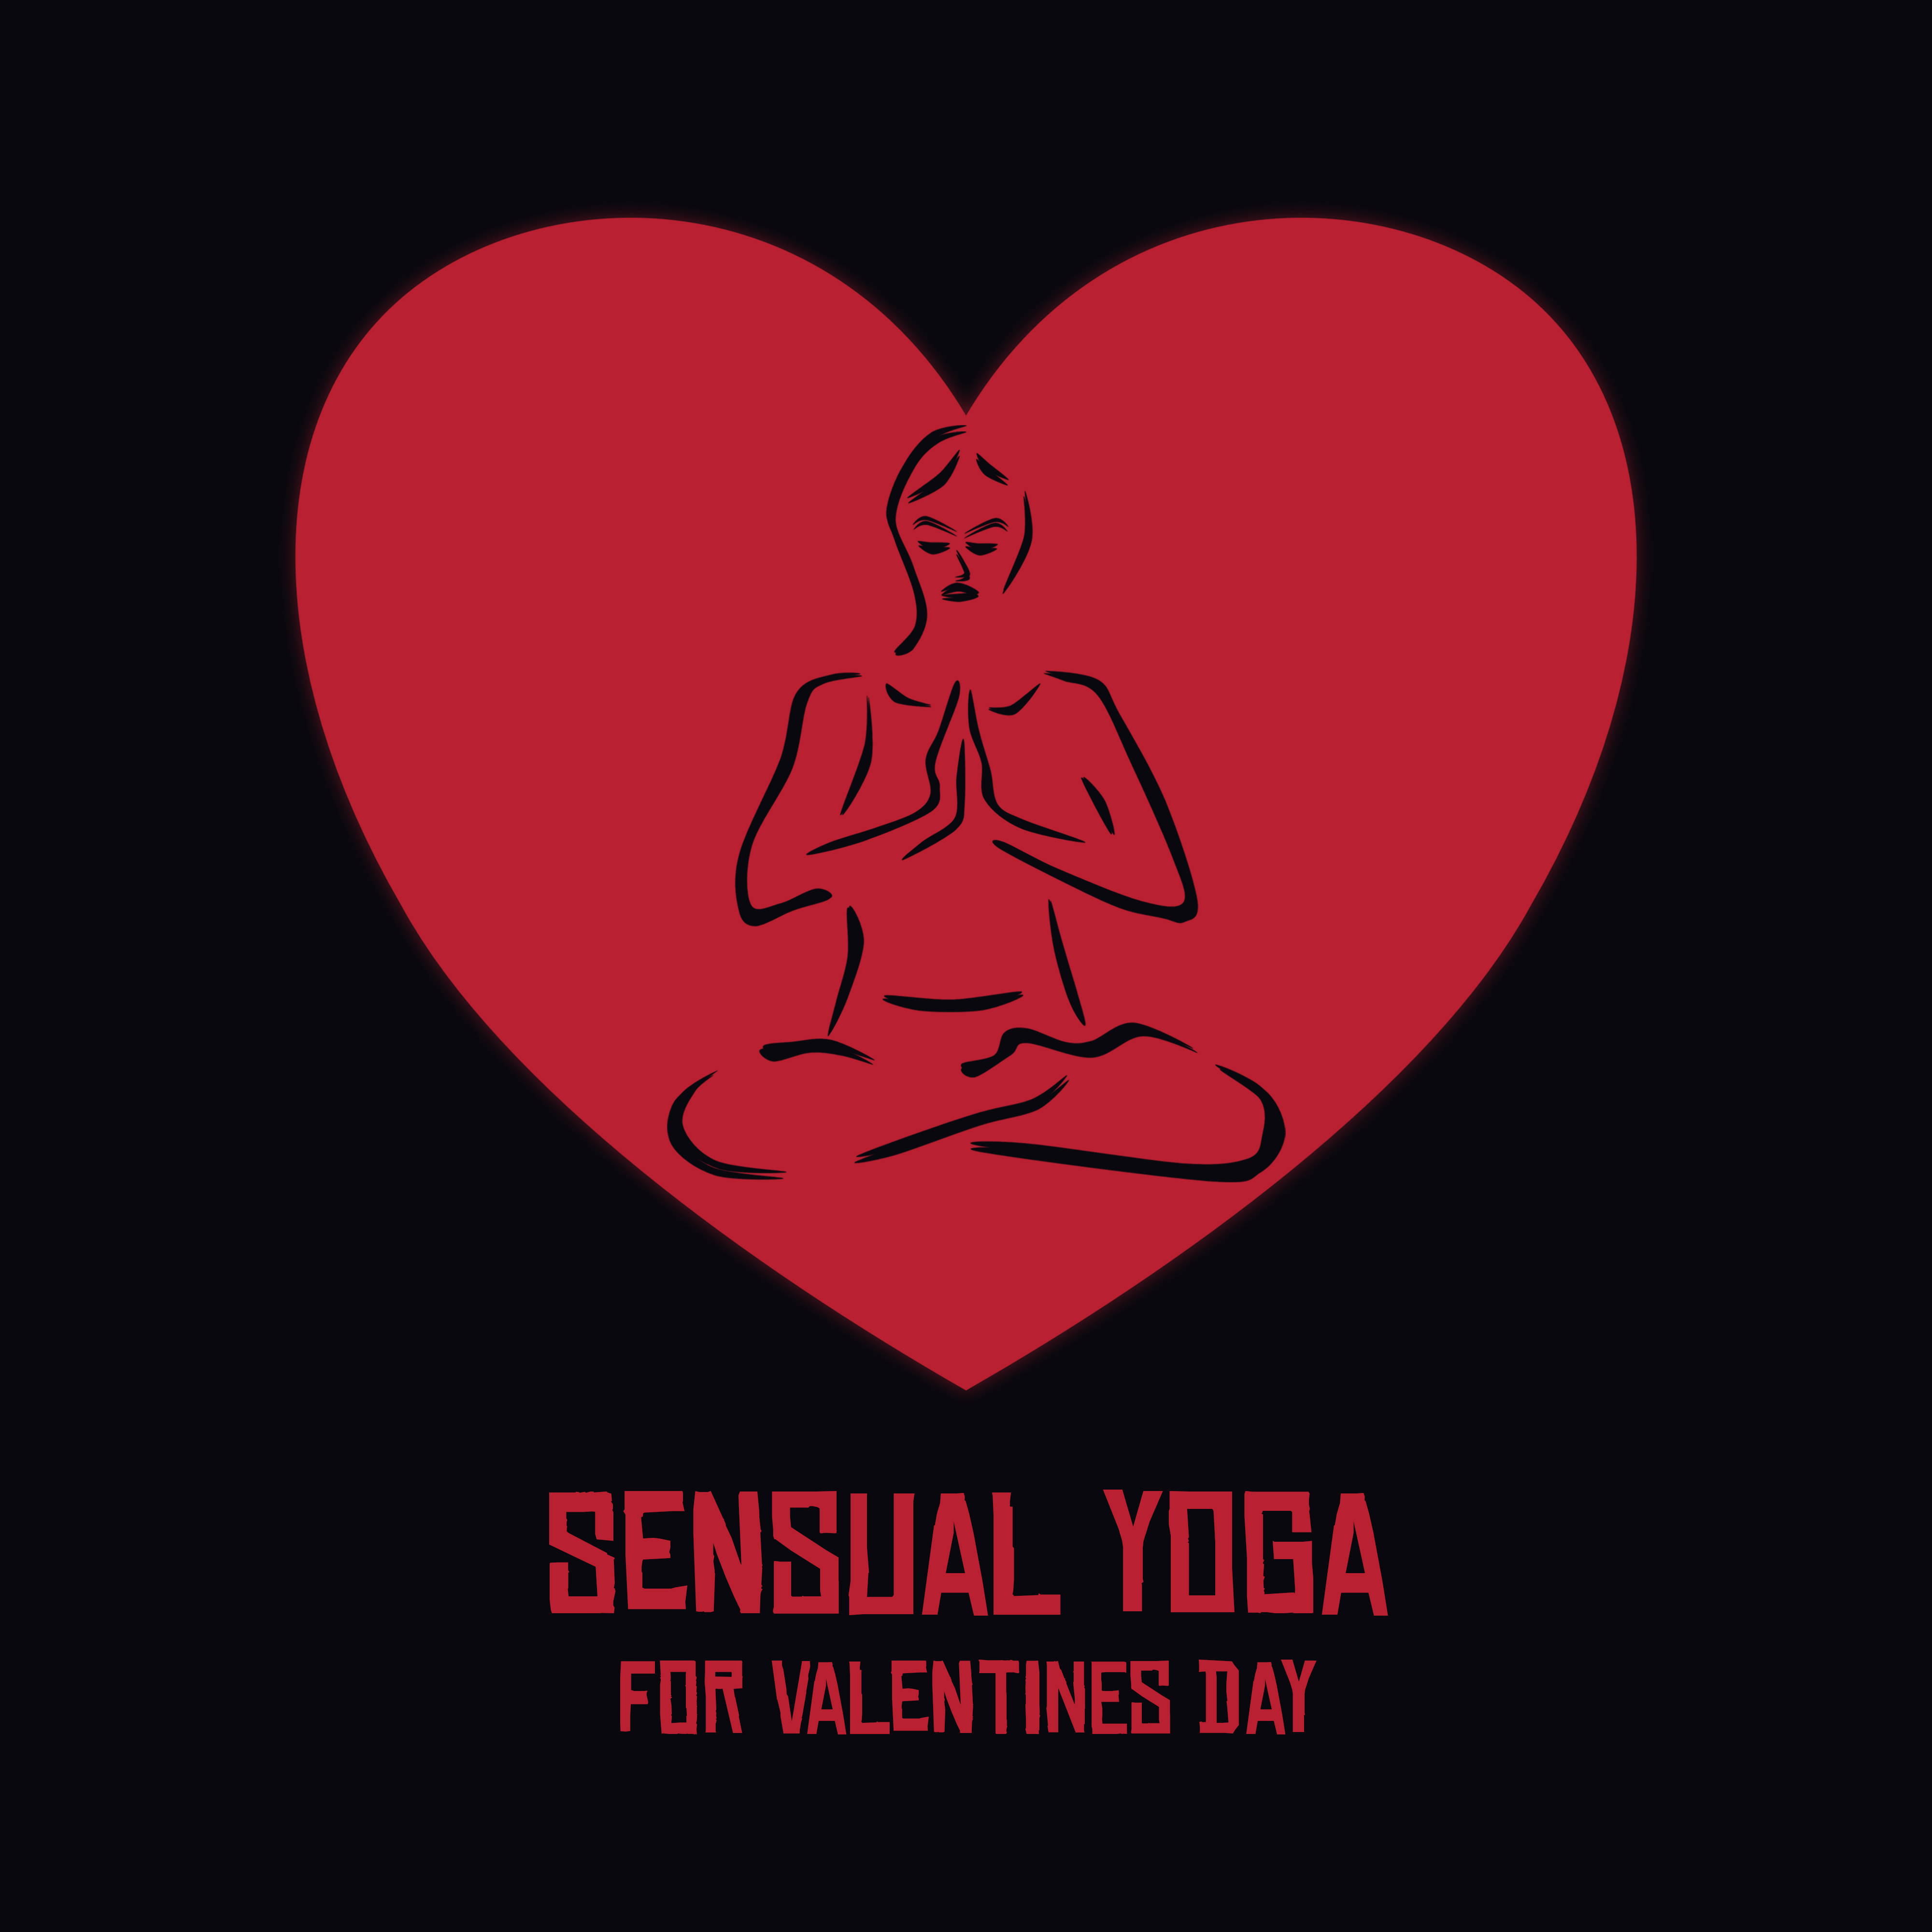 Sensual Yoga for Valentines Day  Deep Relaxation for Lovers, Meditation Music Zone, Tantric Massage, Sensual Music for Yoga Bliss